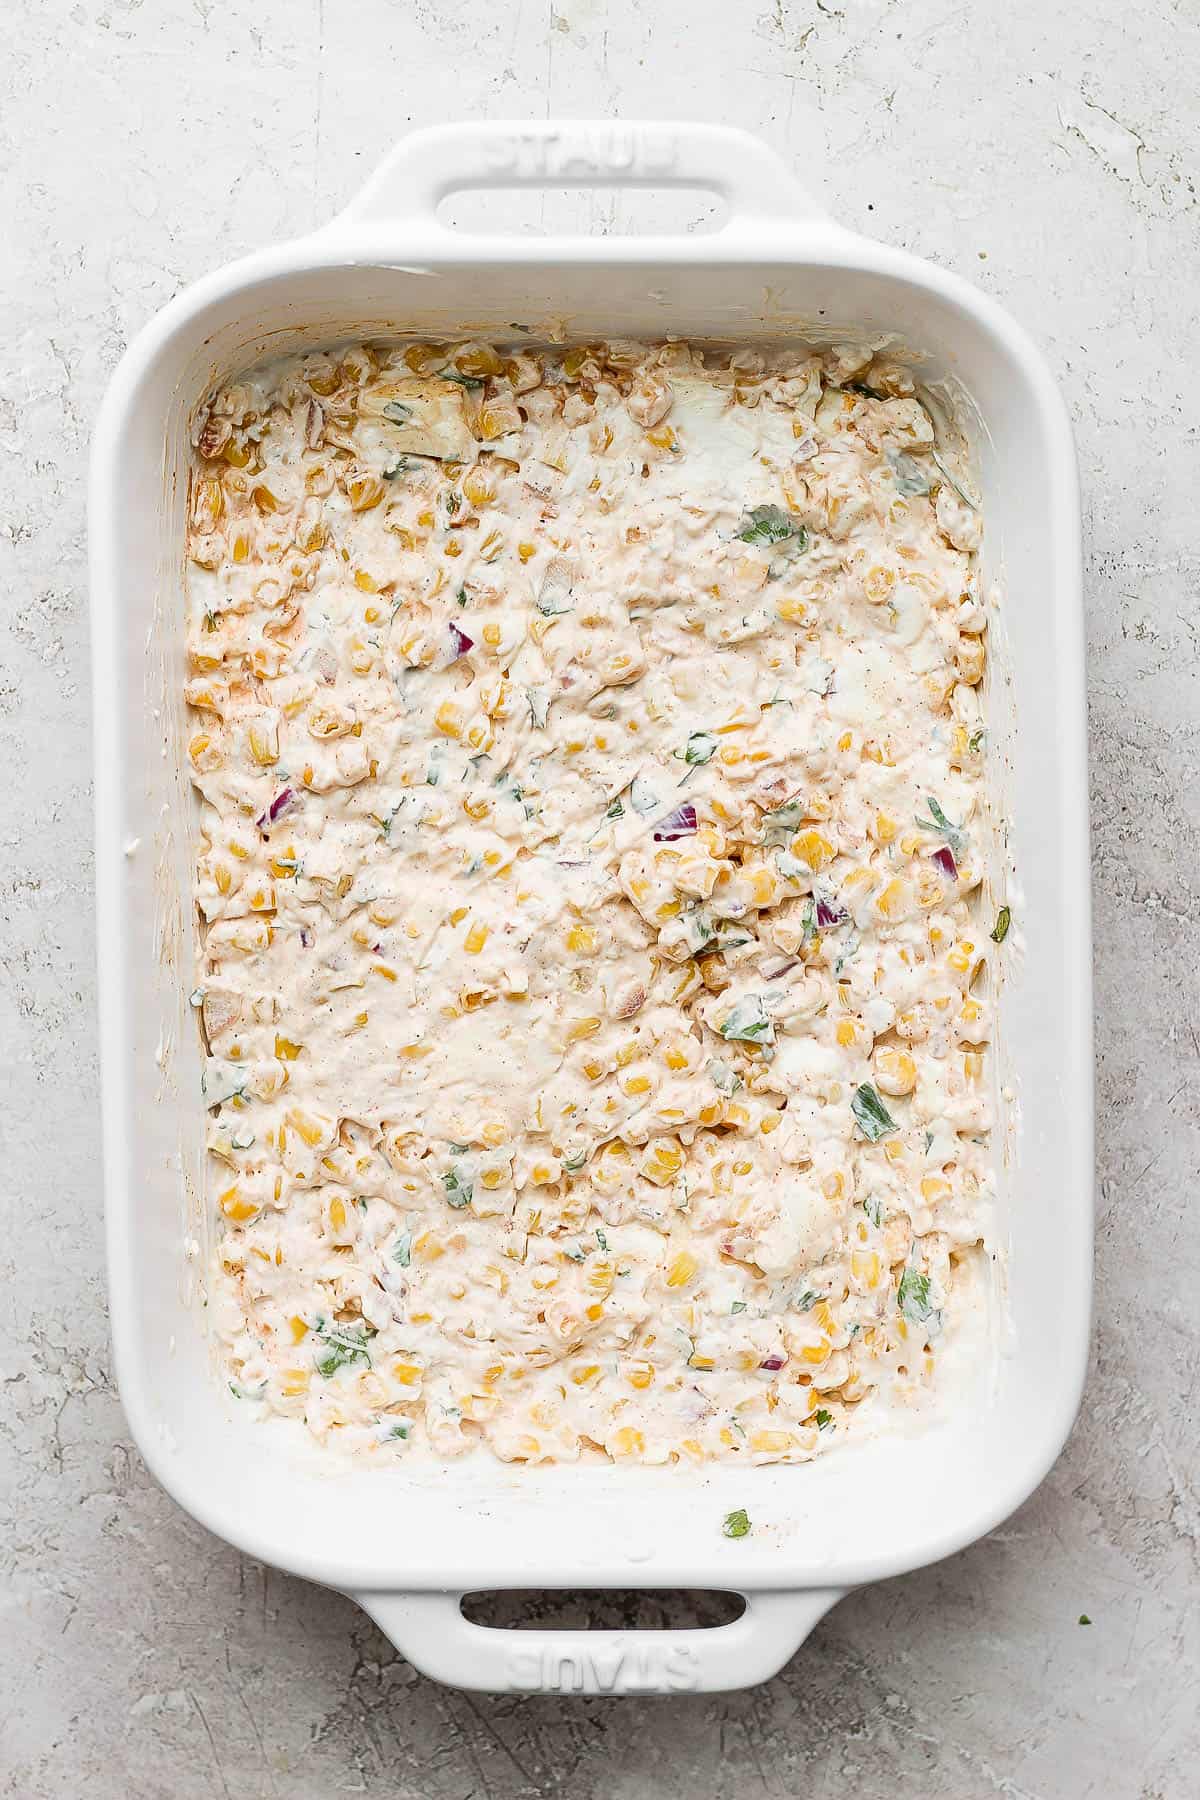 The baking dish with the cream cheese, mayo, and sour cream mixed in with the corn mixture and spread evenly on the bottom of the baking dish.